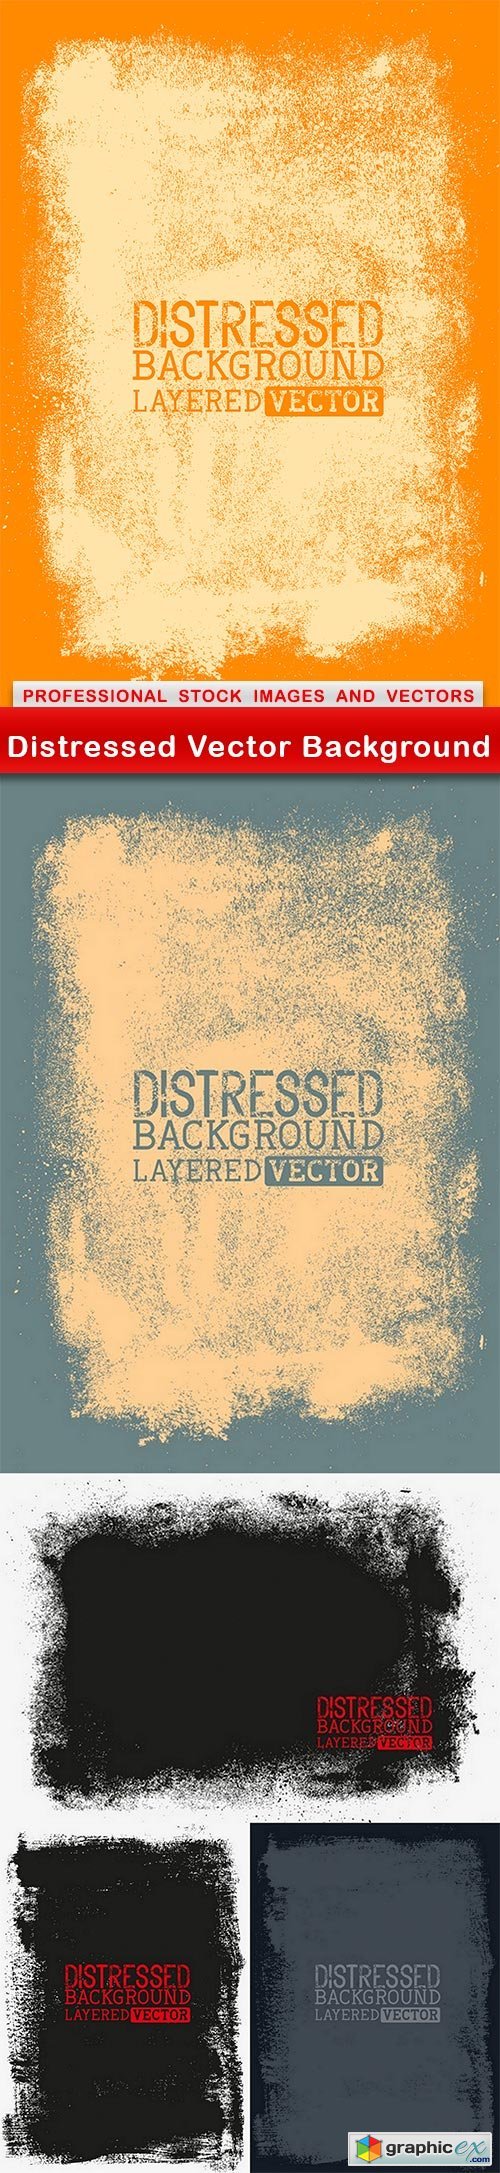 Distressed Vector Background - 5 EPS